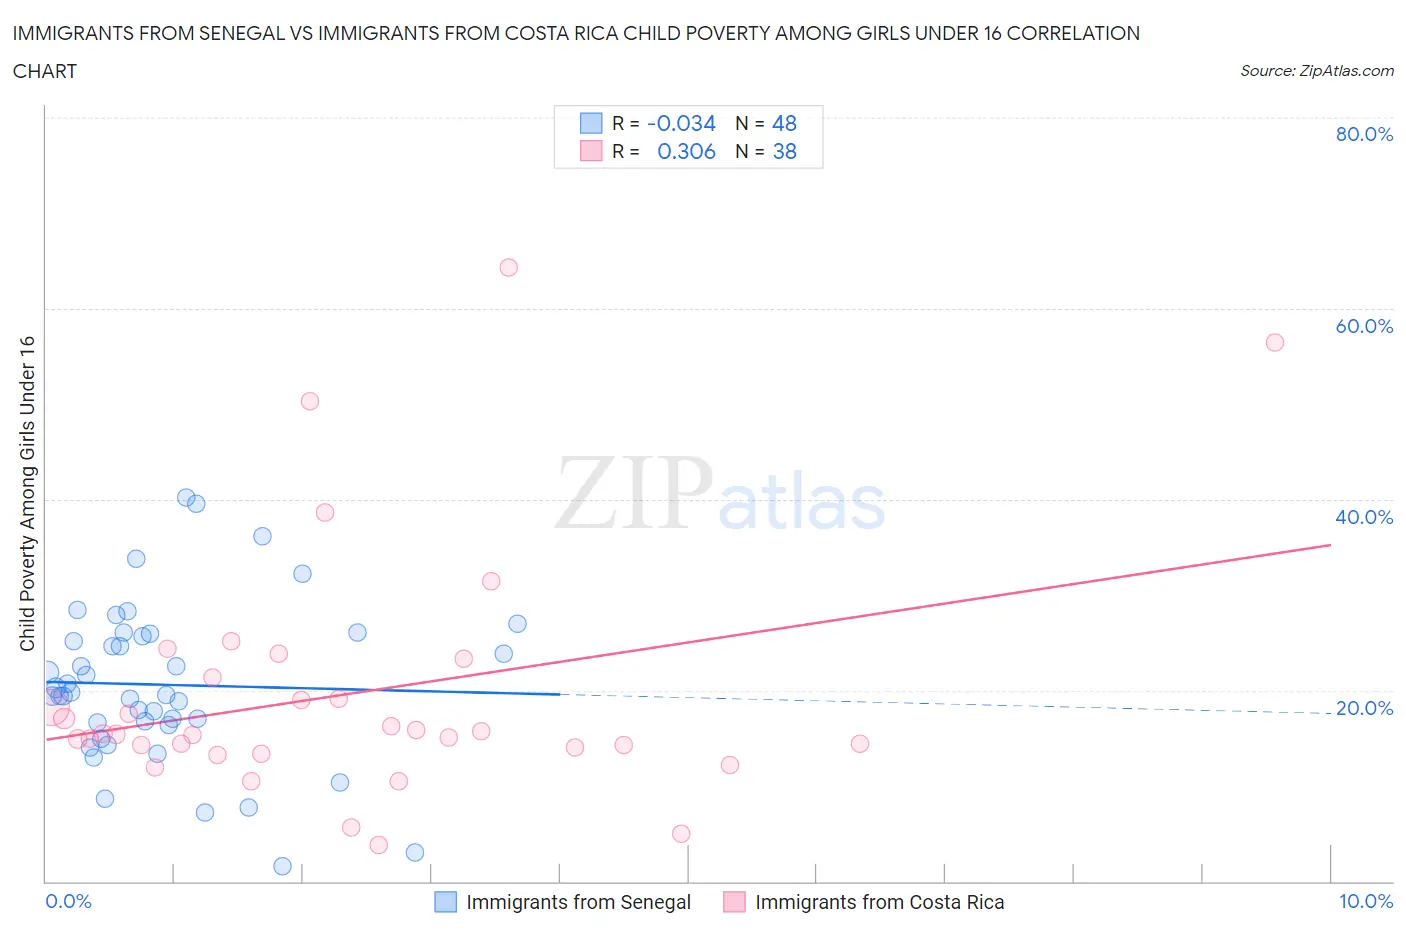 Immigrants from Senegal vs Immigrants from Costa Rica Child Poverty Among Girls Under 16